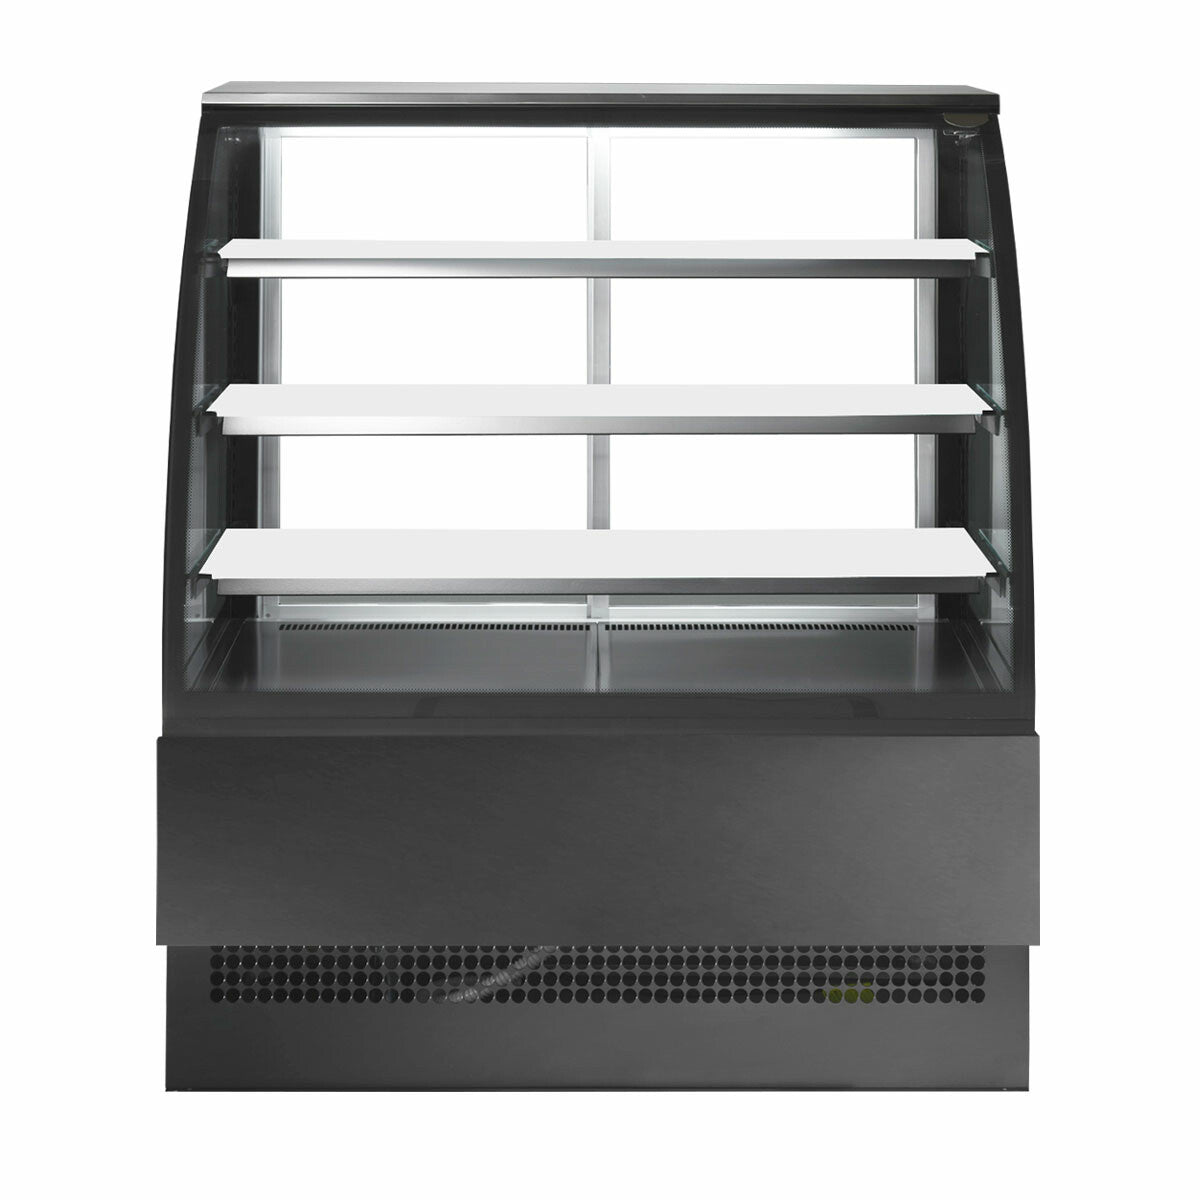 Sterling Pro EVO150-BLACK-R290A Patisserie Counter  1500mm